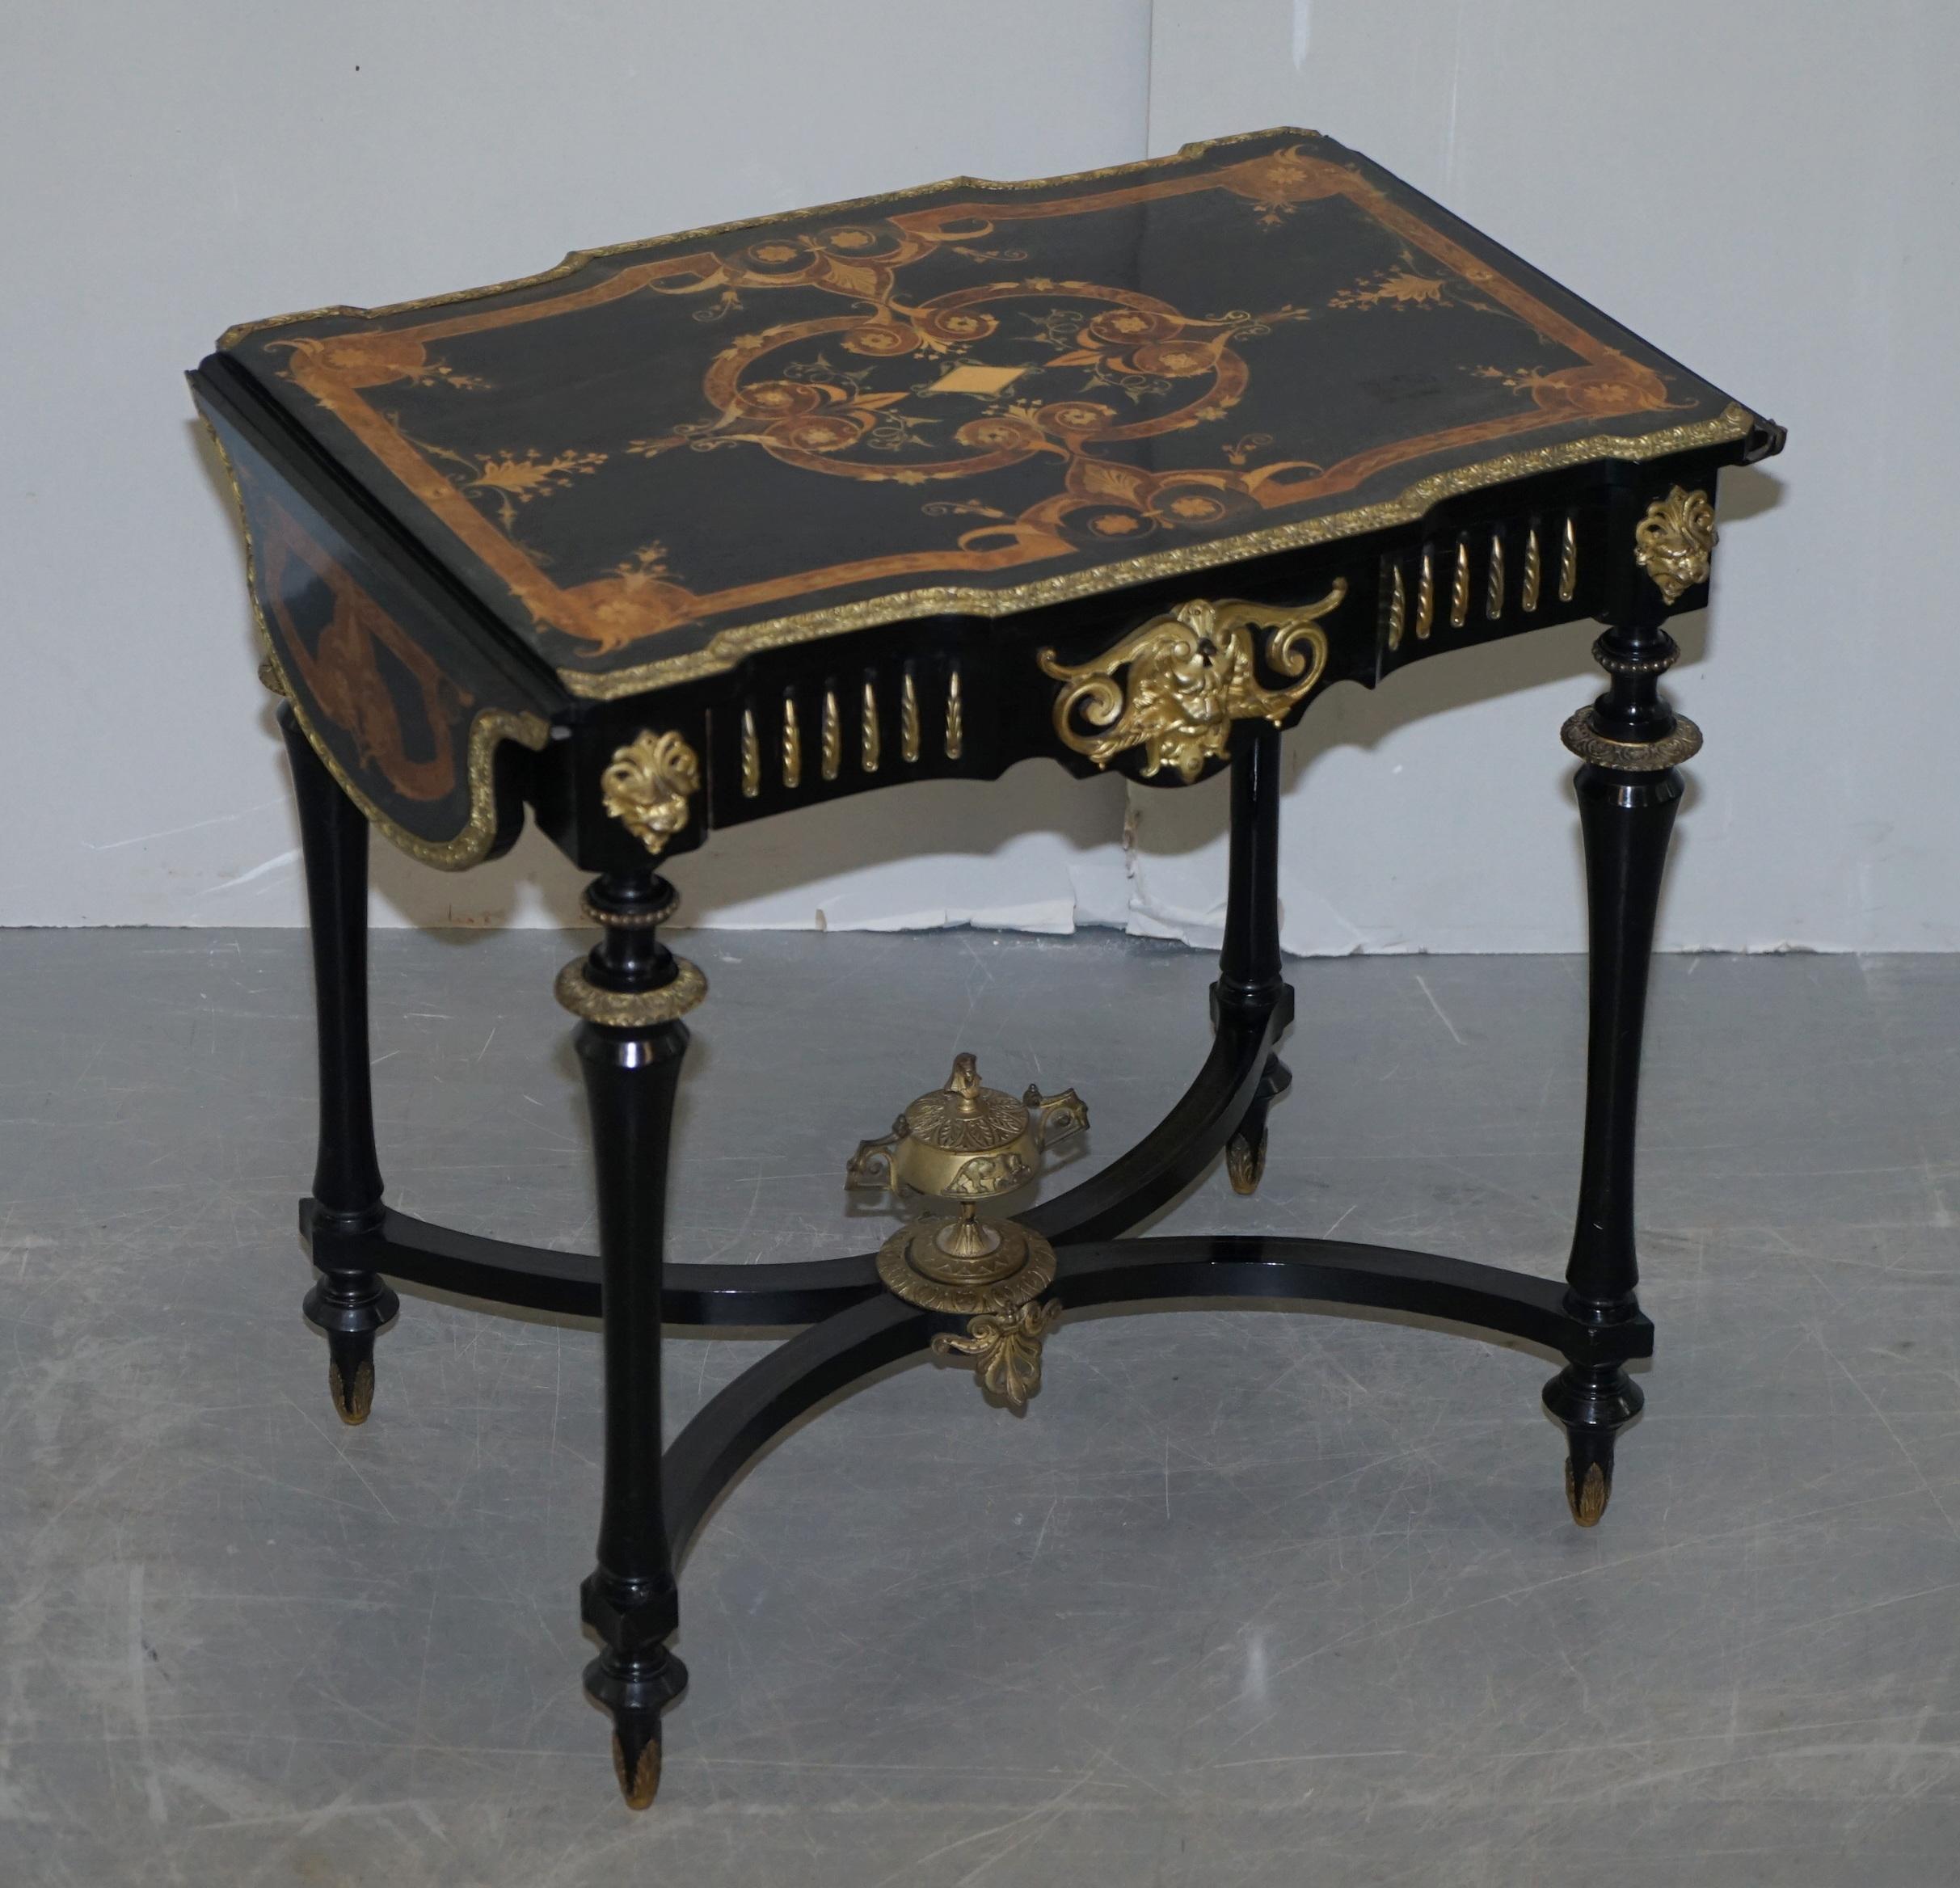 We are delighted to offer for sale this stunning original 19th century Louis Philippe Ebonised & Marquetry inlaid writing table with extending side leaves and gilt bronze fixtures and fittings 

A very fine table, made from luxury amboyna and